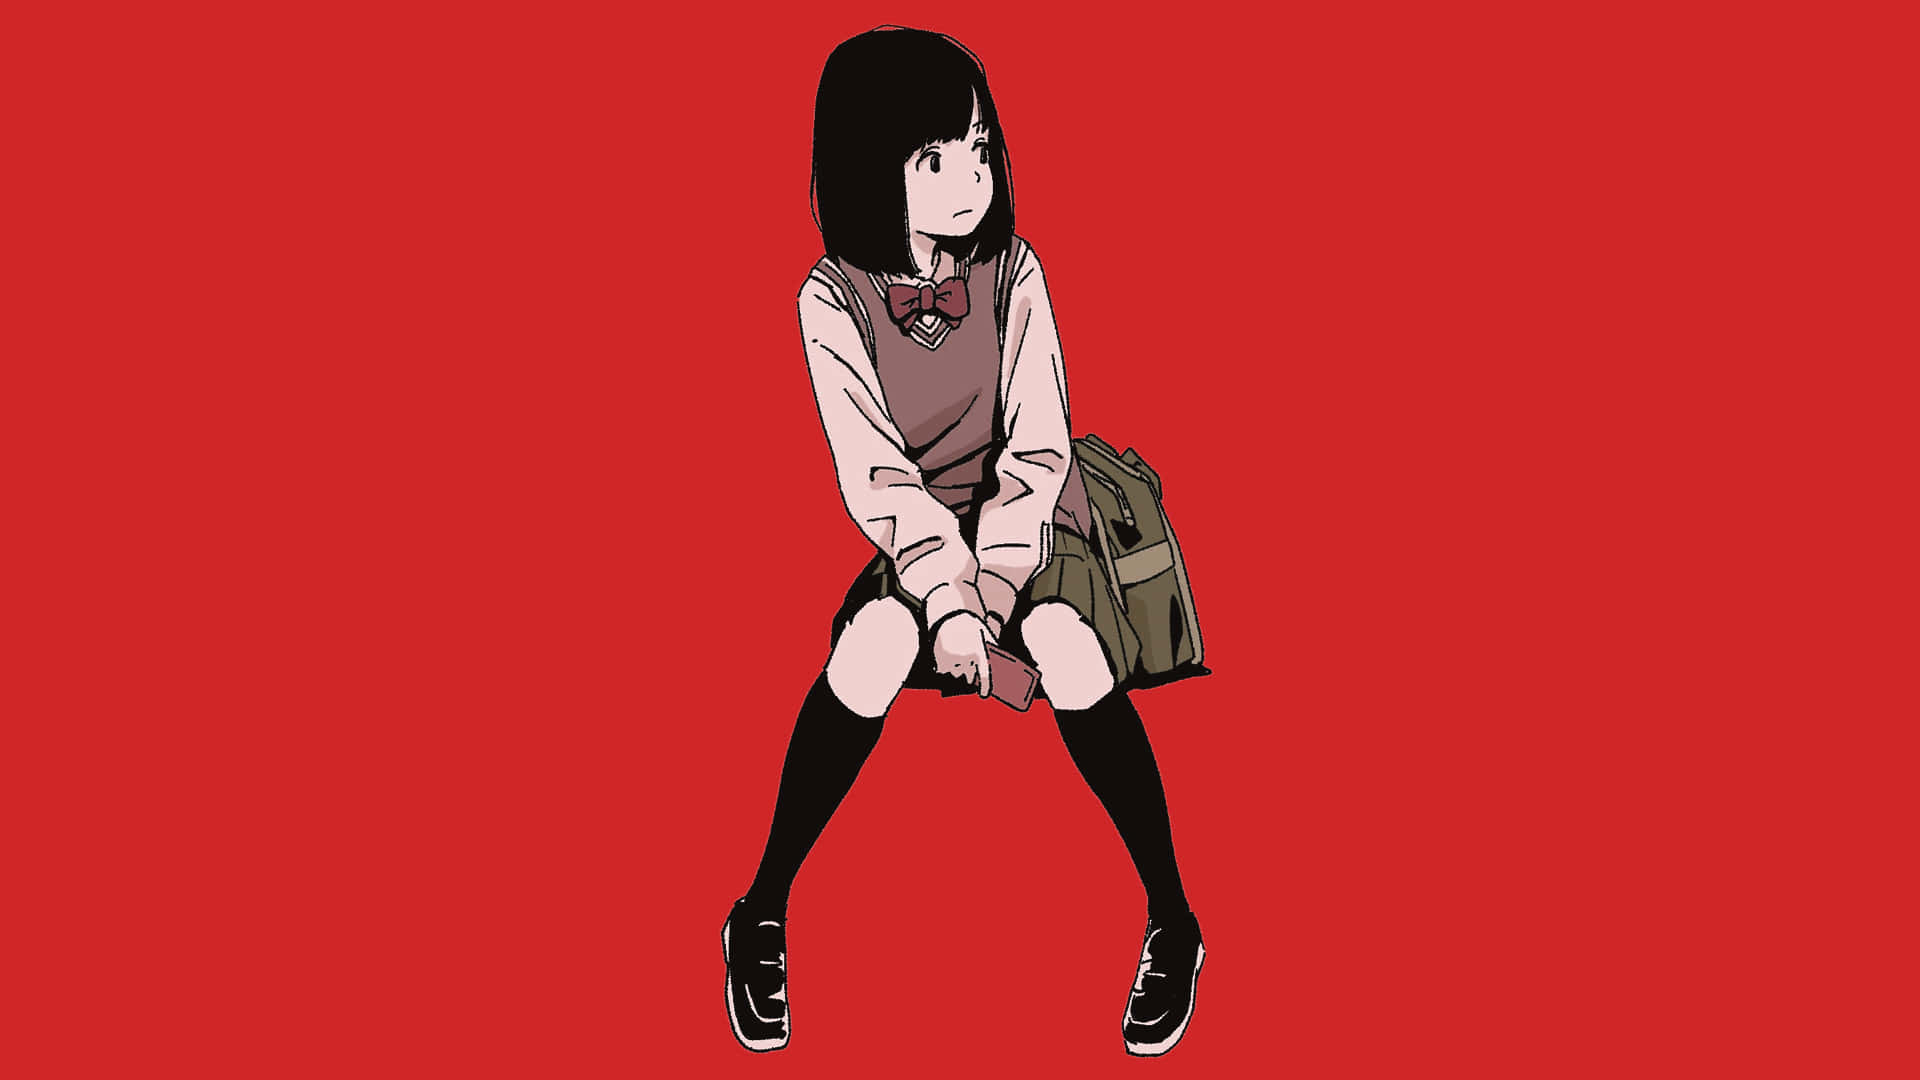 Looking stylish and nerdy with this Red Aesthetic Anime Laptop! Wallpaper